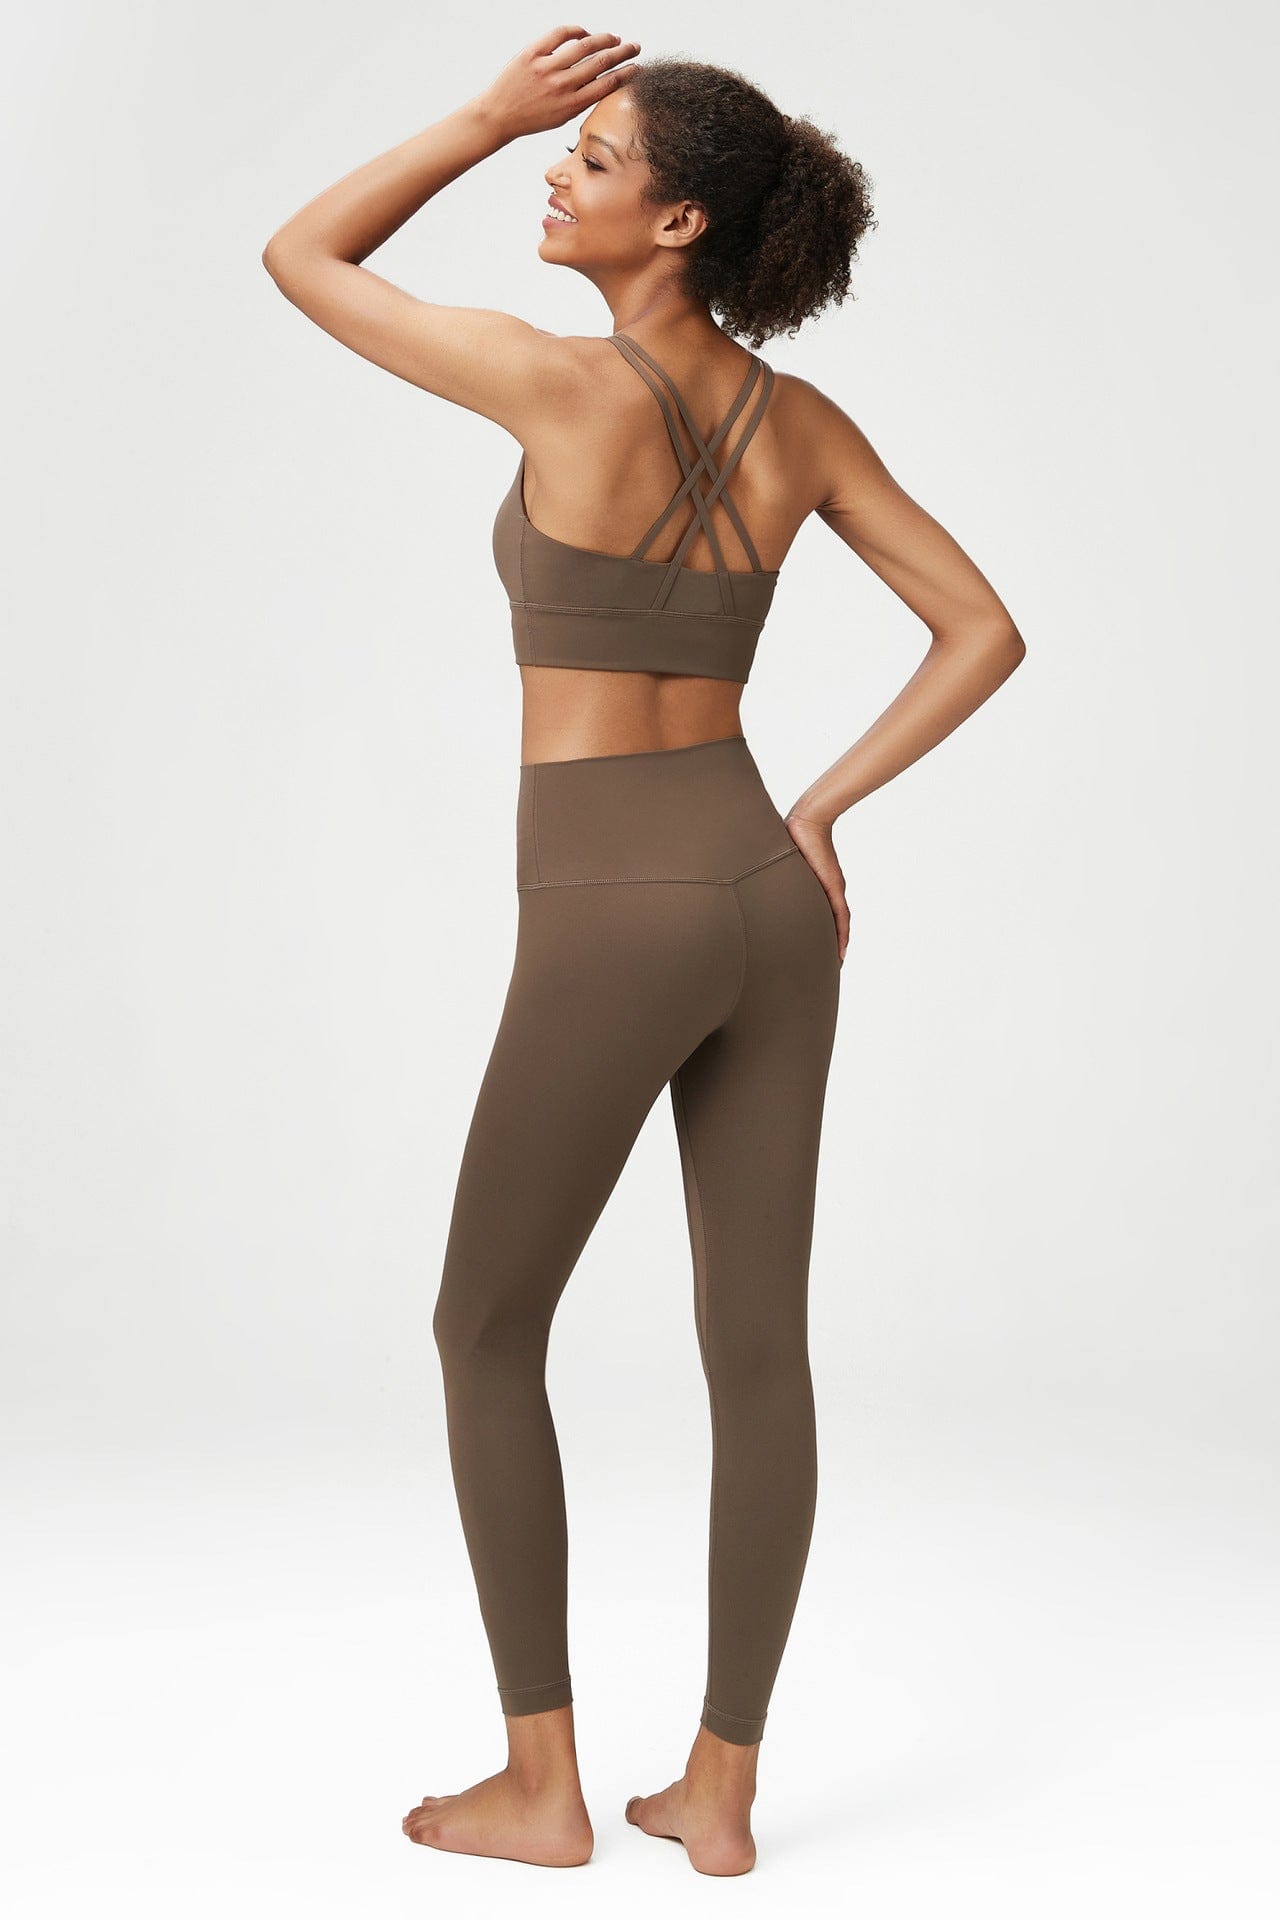 Sporty and Fit Compression 2 Pice Set – SqueezMeSkinny